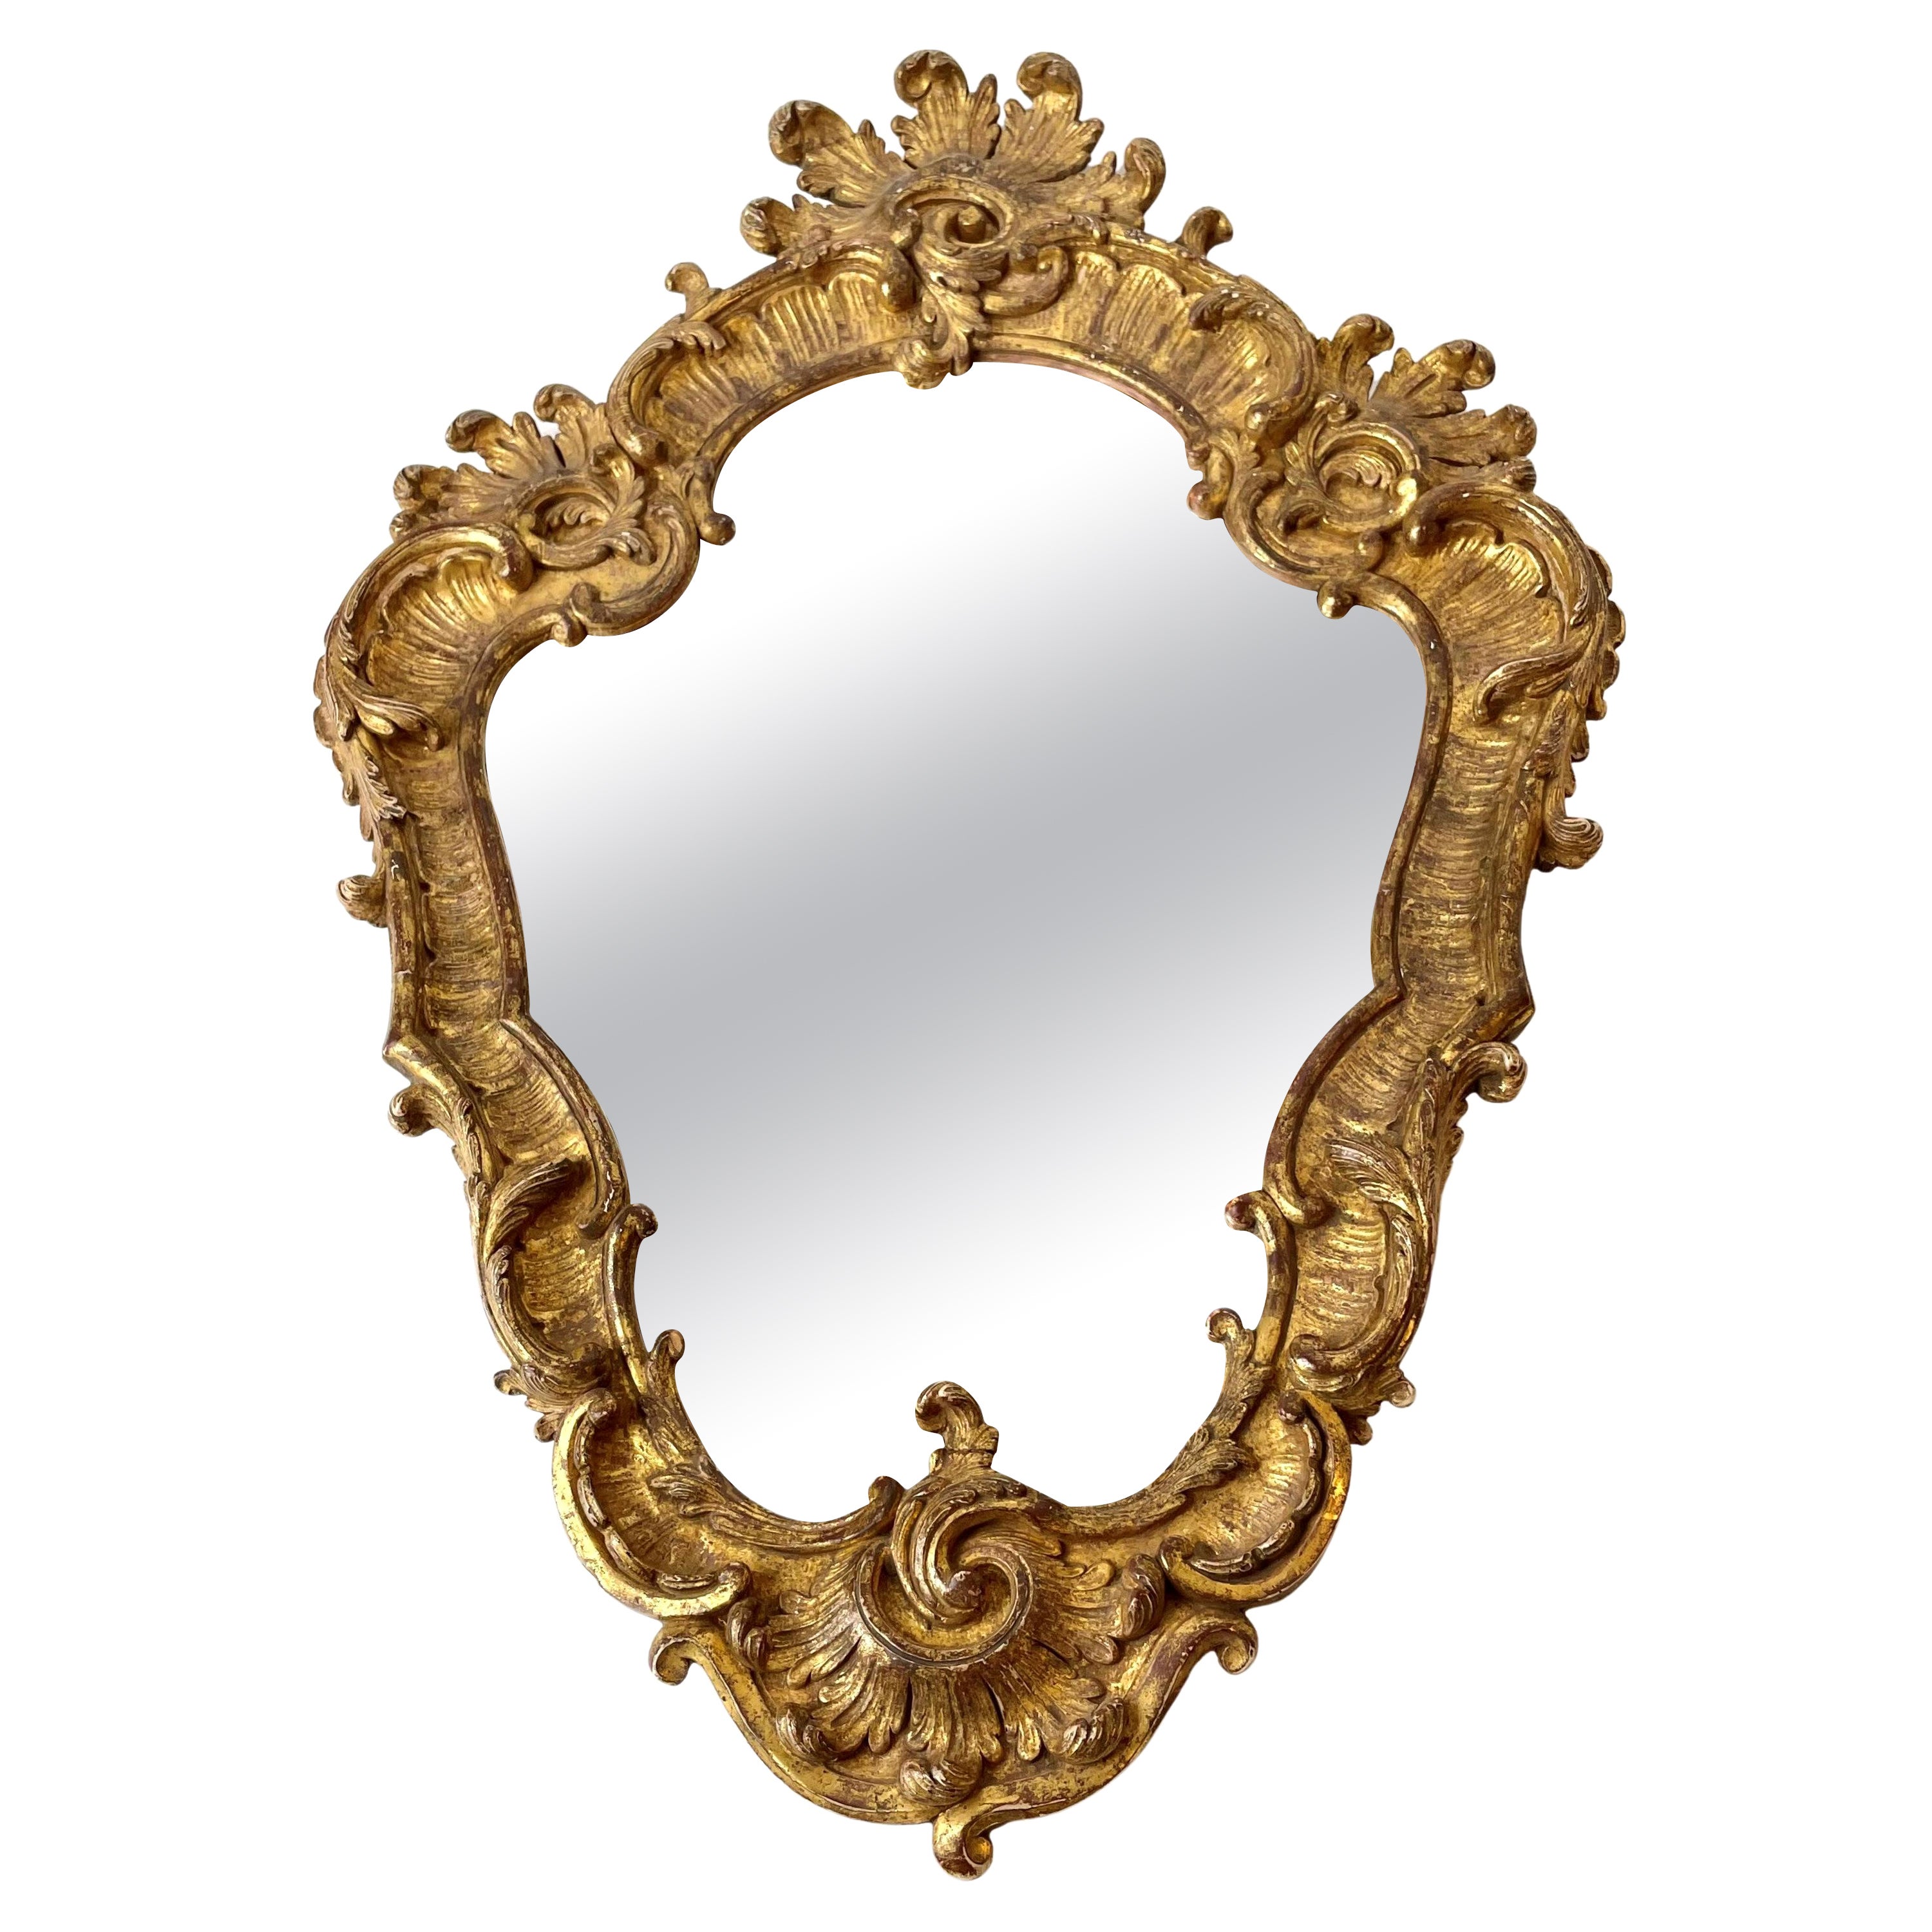 Elegant French Rococo Mirror with original gilding from Mid-18th Century For Sale